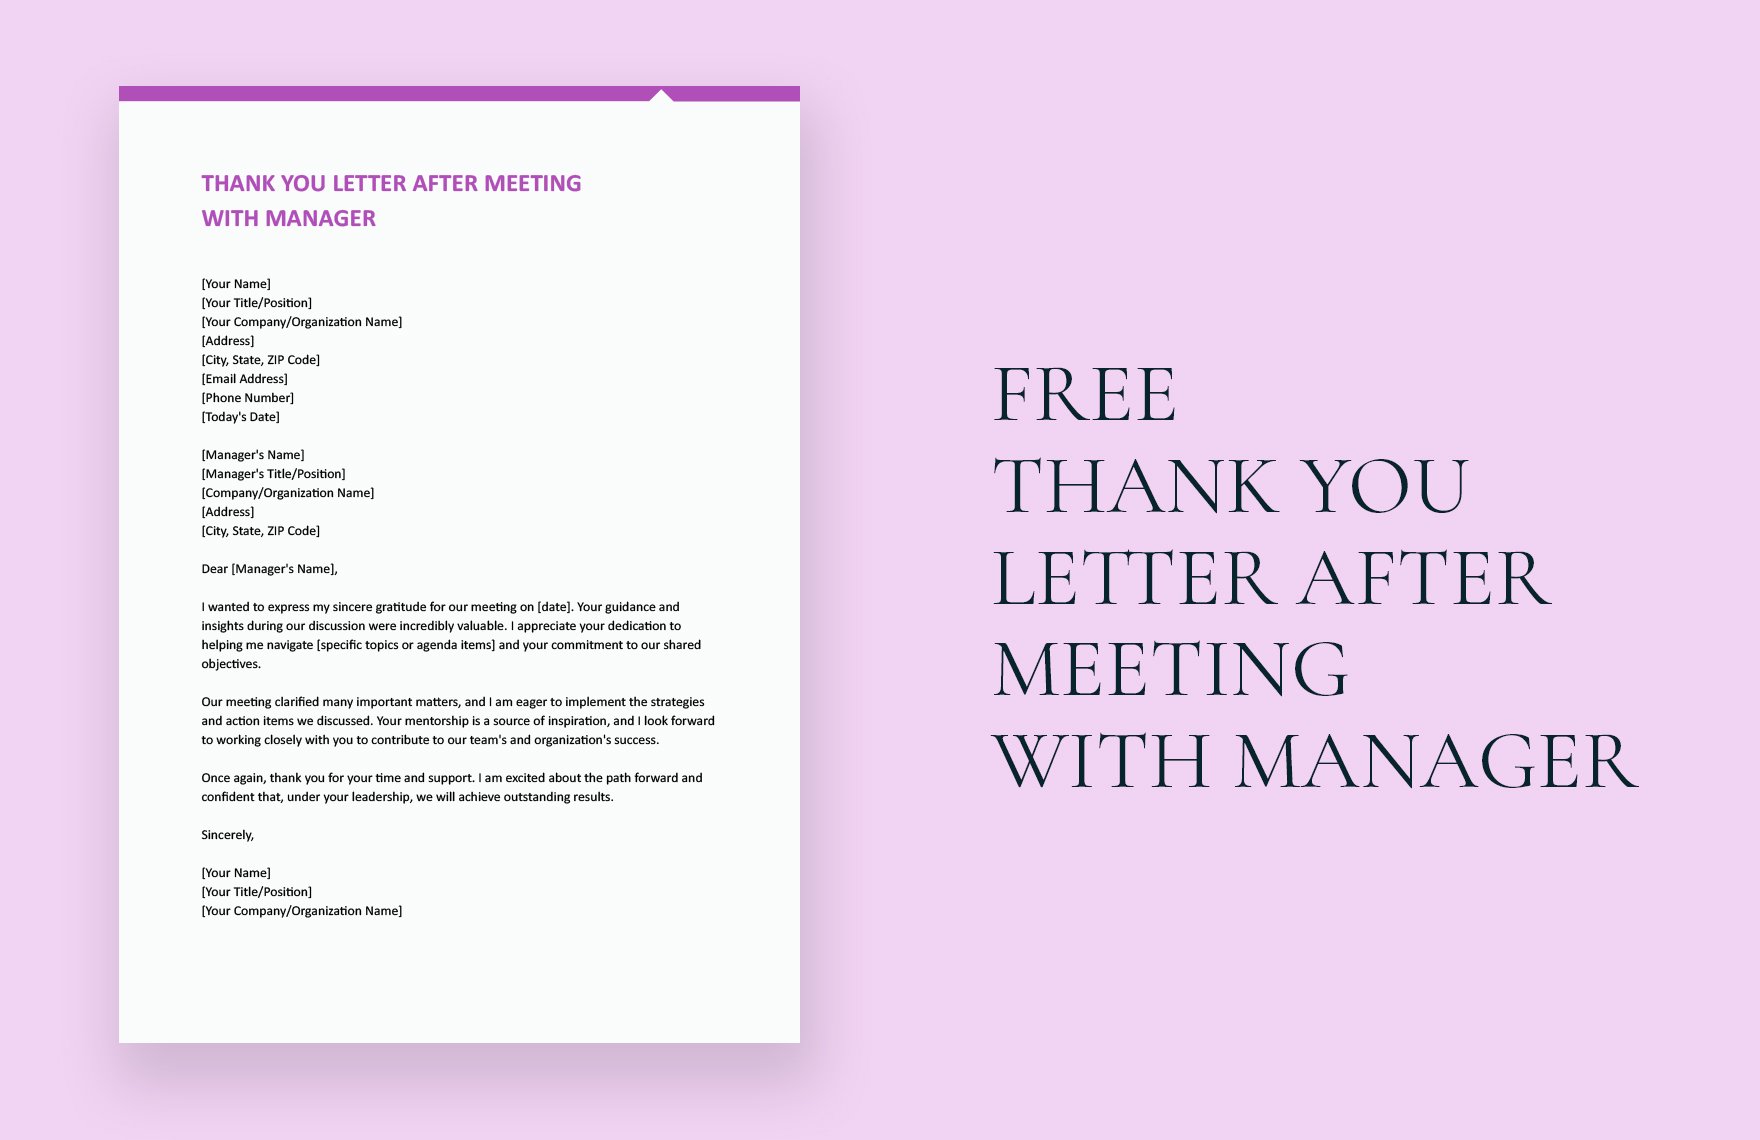 Free Thank You Letter After Meeting With Manager